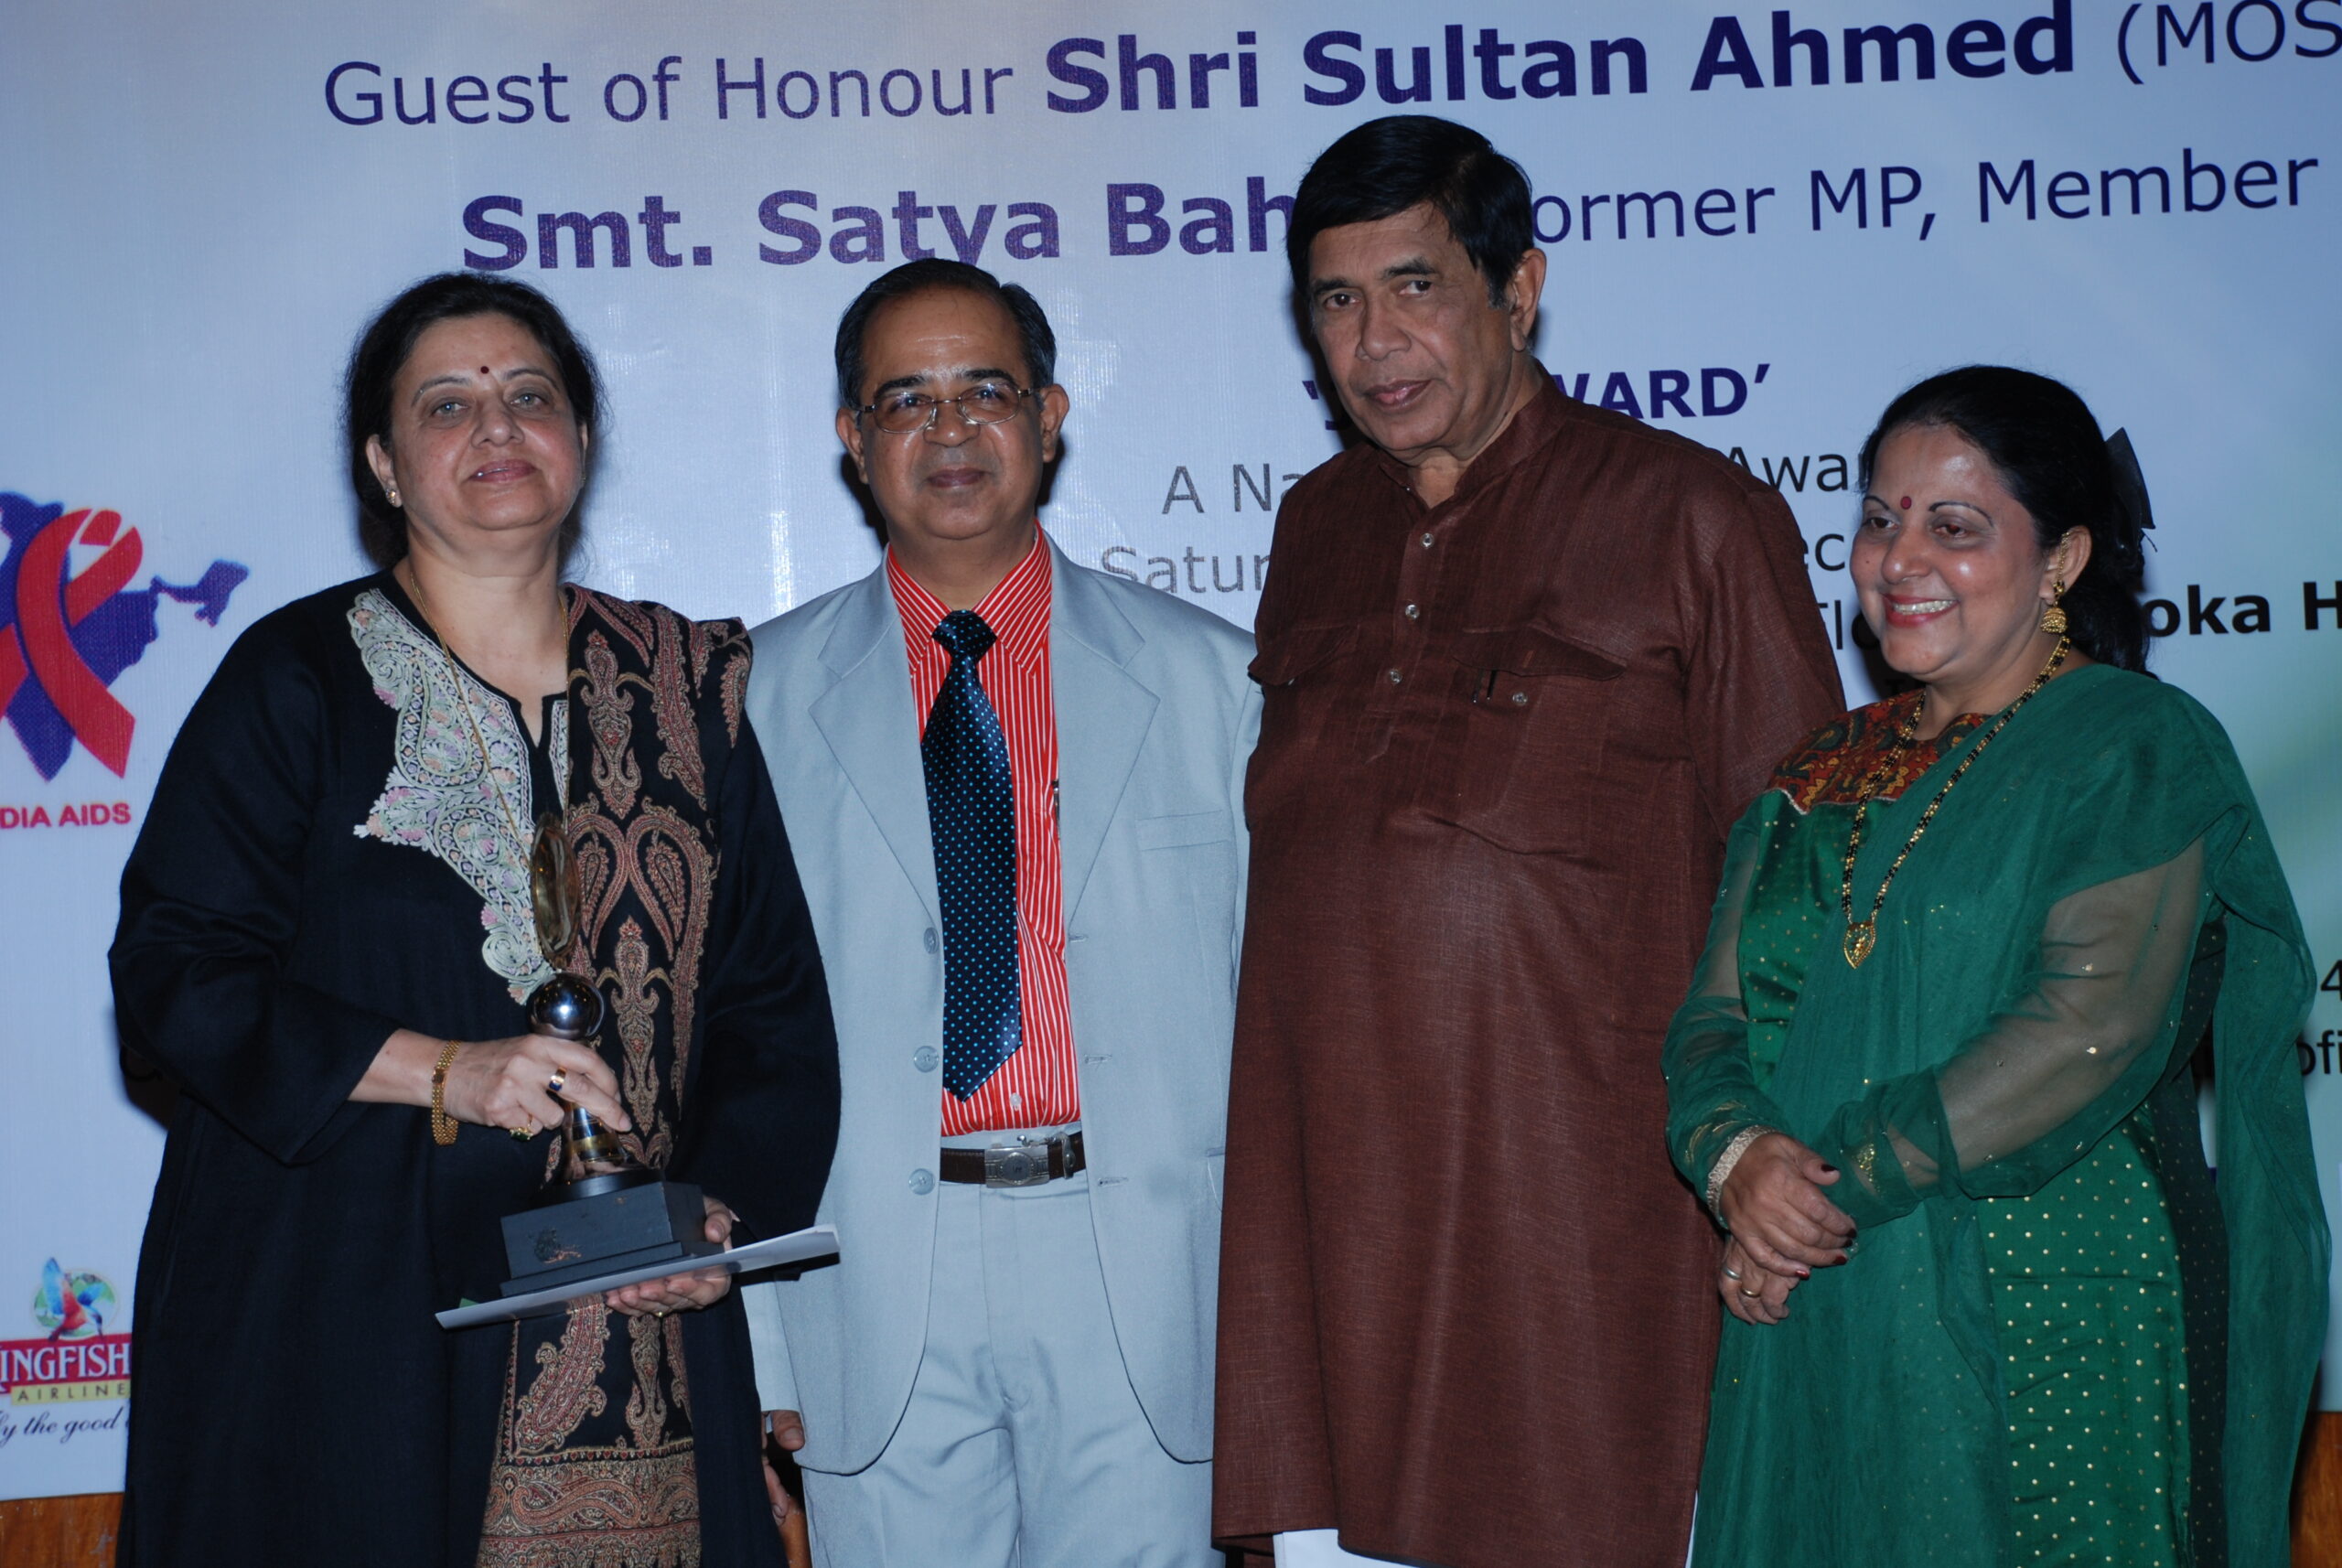 H K Sethi : Journalist Association of India announced their Annual Awards